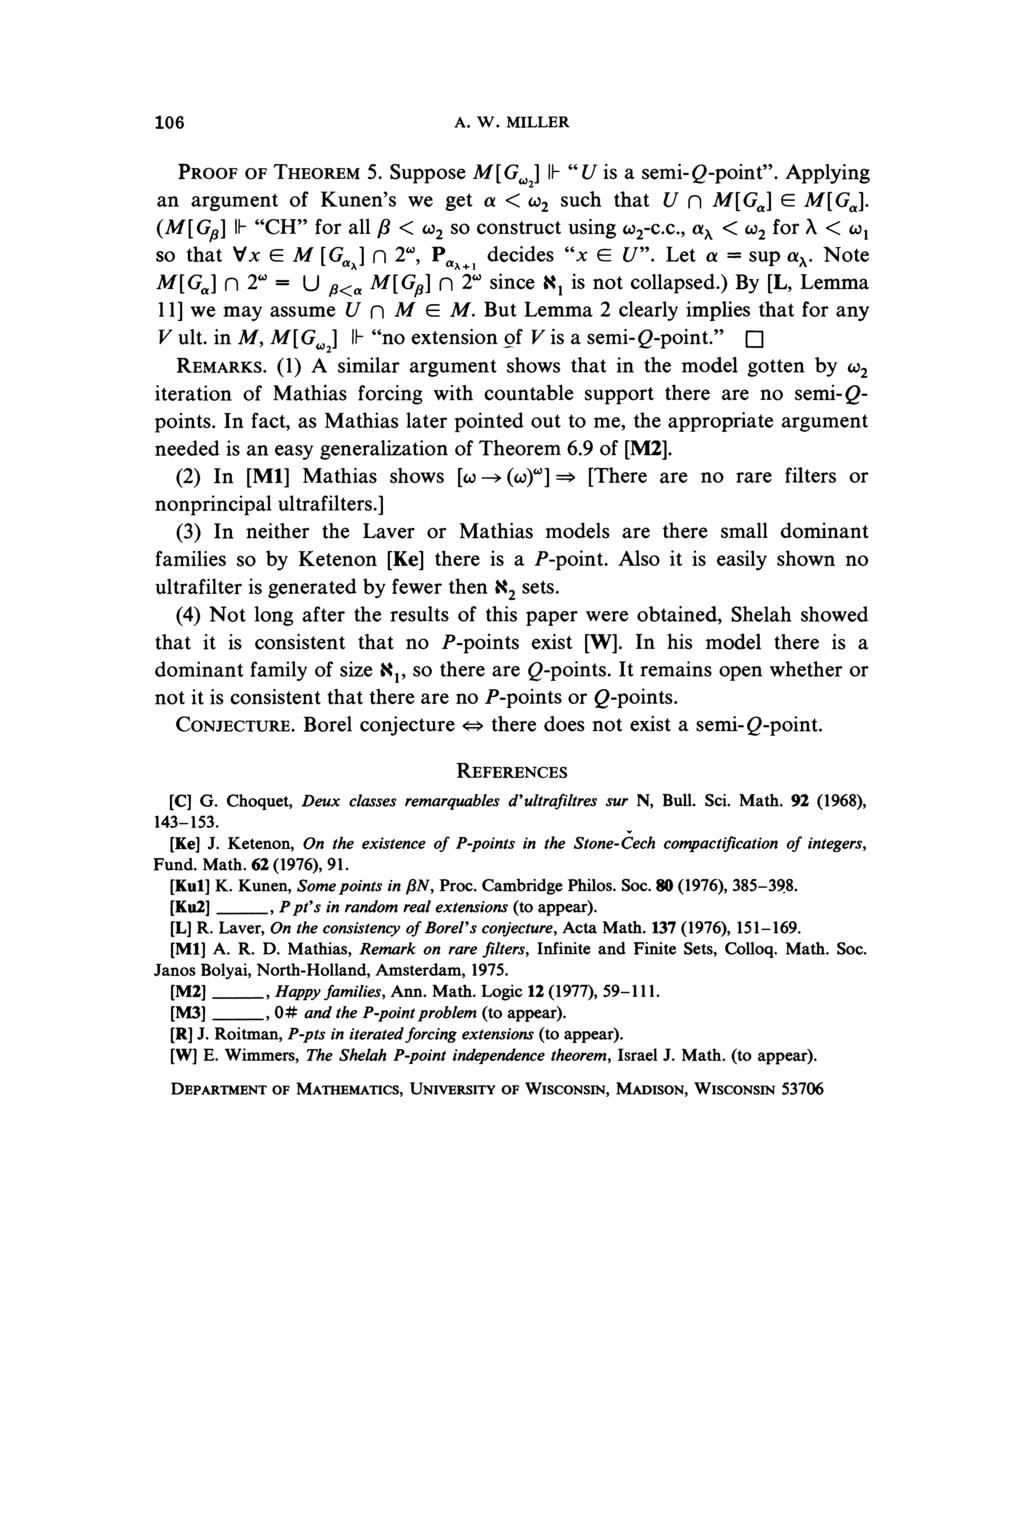 106 A. W. MILLER PROOF OF THEOREM 5. Suppose M[G^,2] IF "U is a semi-q-point". Applying an argument of Kunen's we get a < 2 such that U n M[Gat] E M[GoJ.